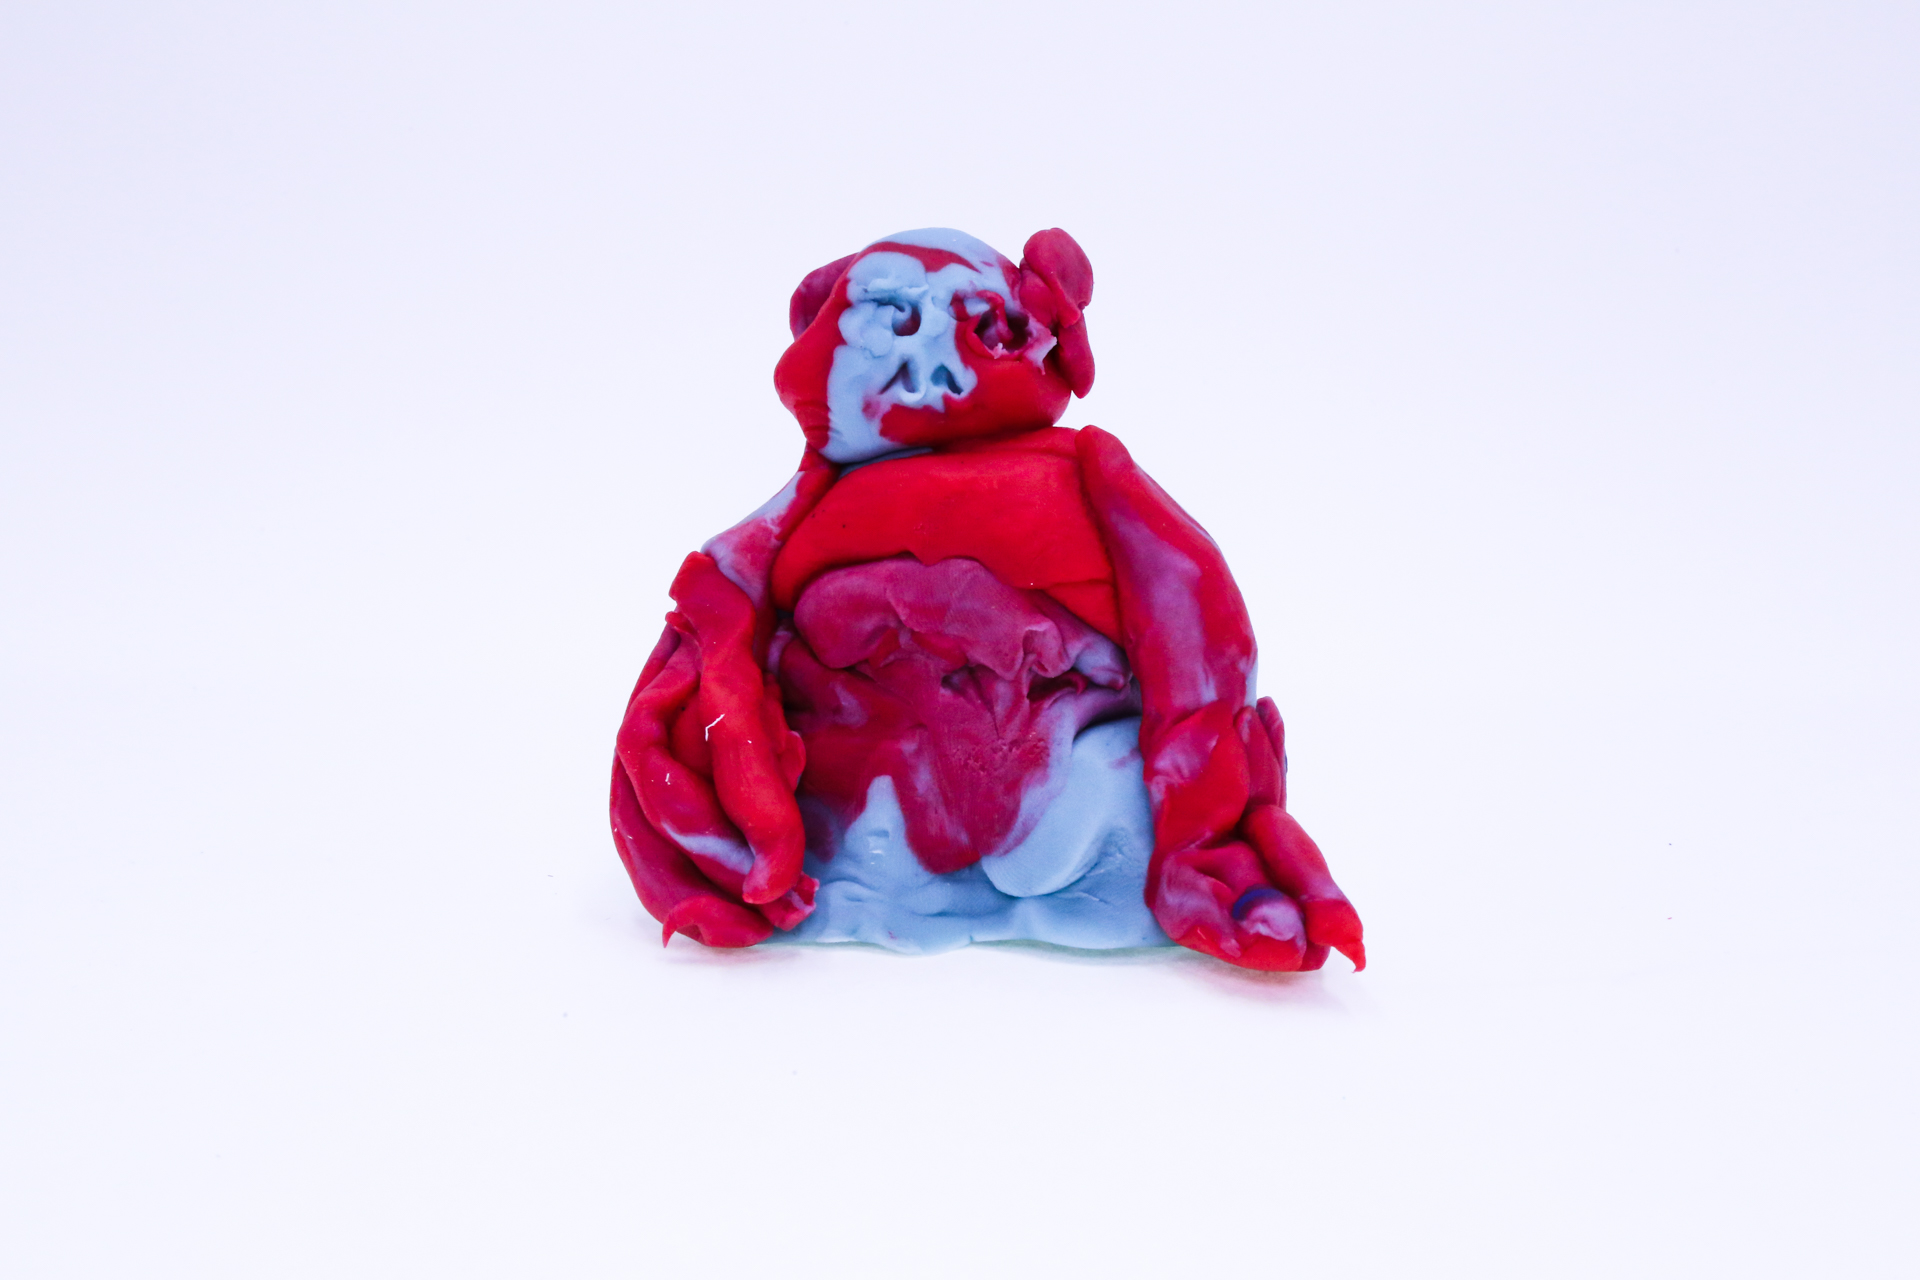 Frankenstein is a red and blue play-dough sculpture of a monster.